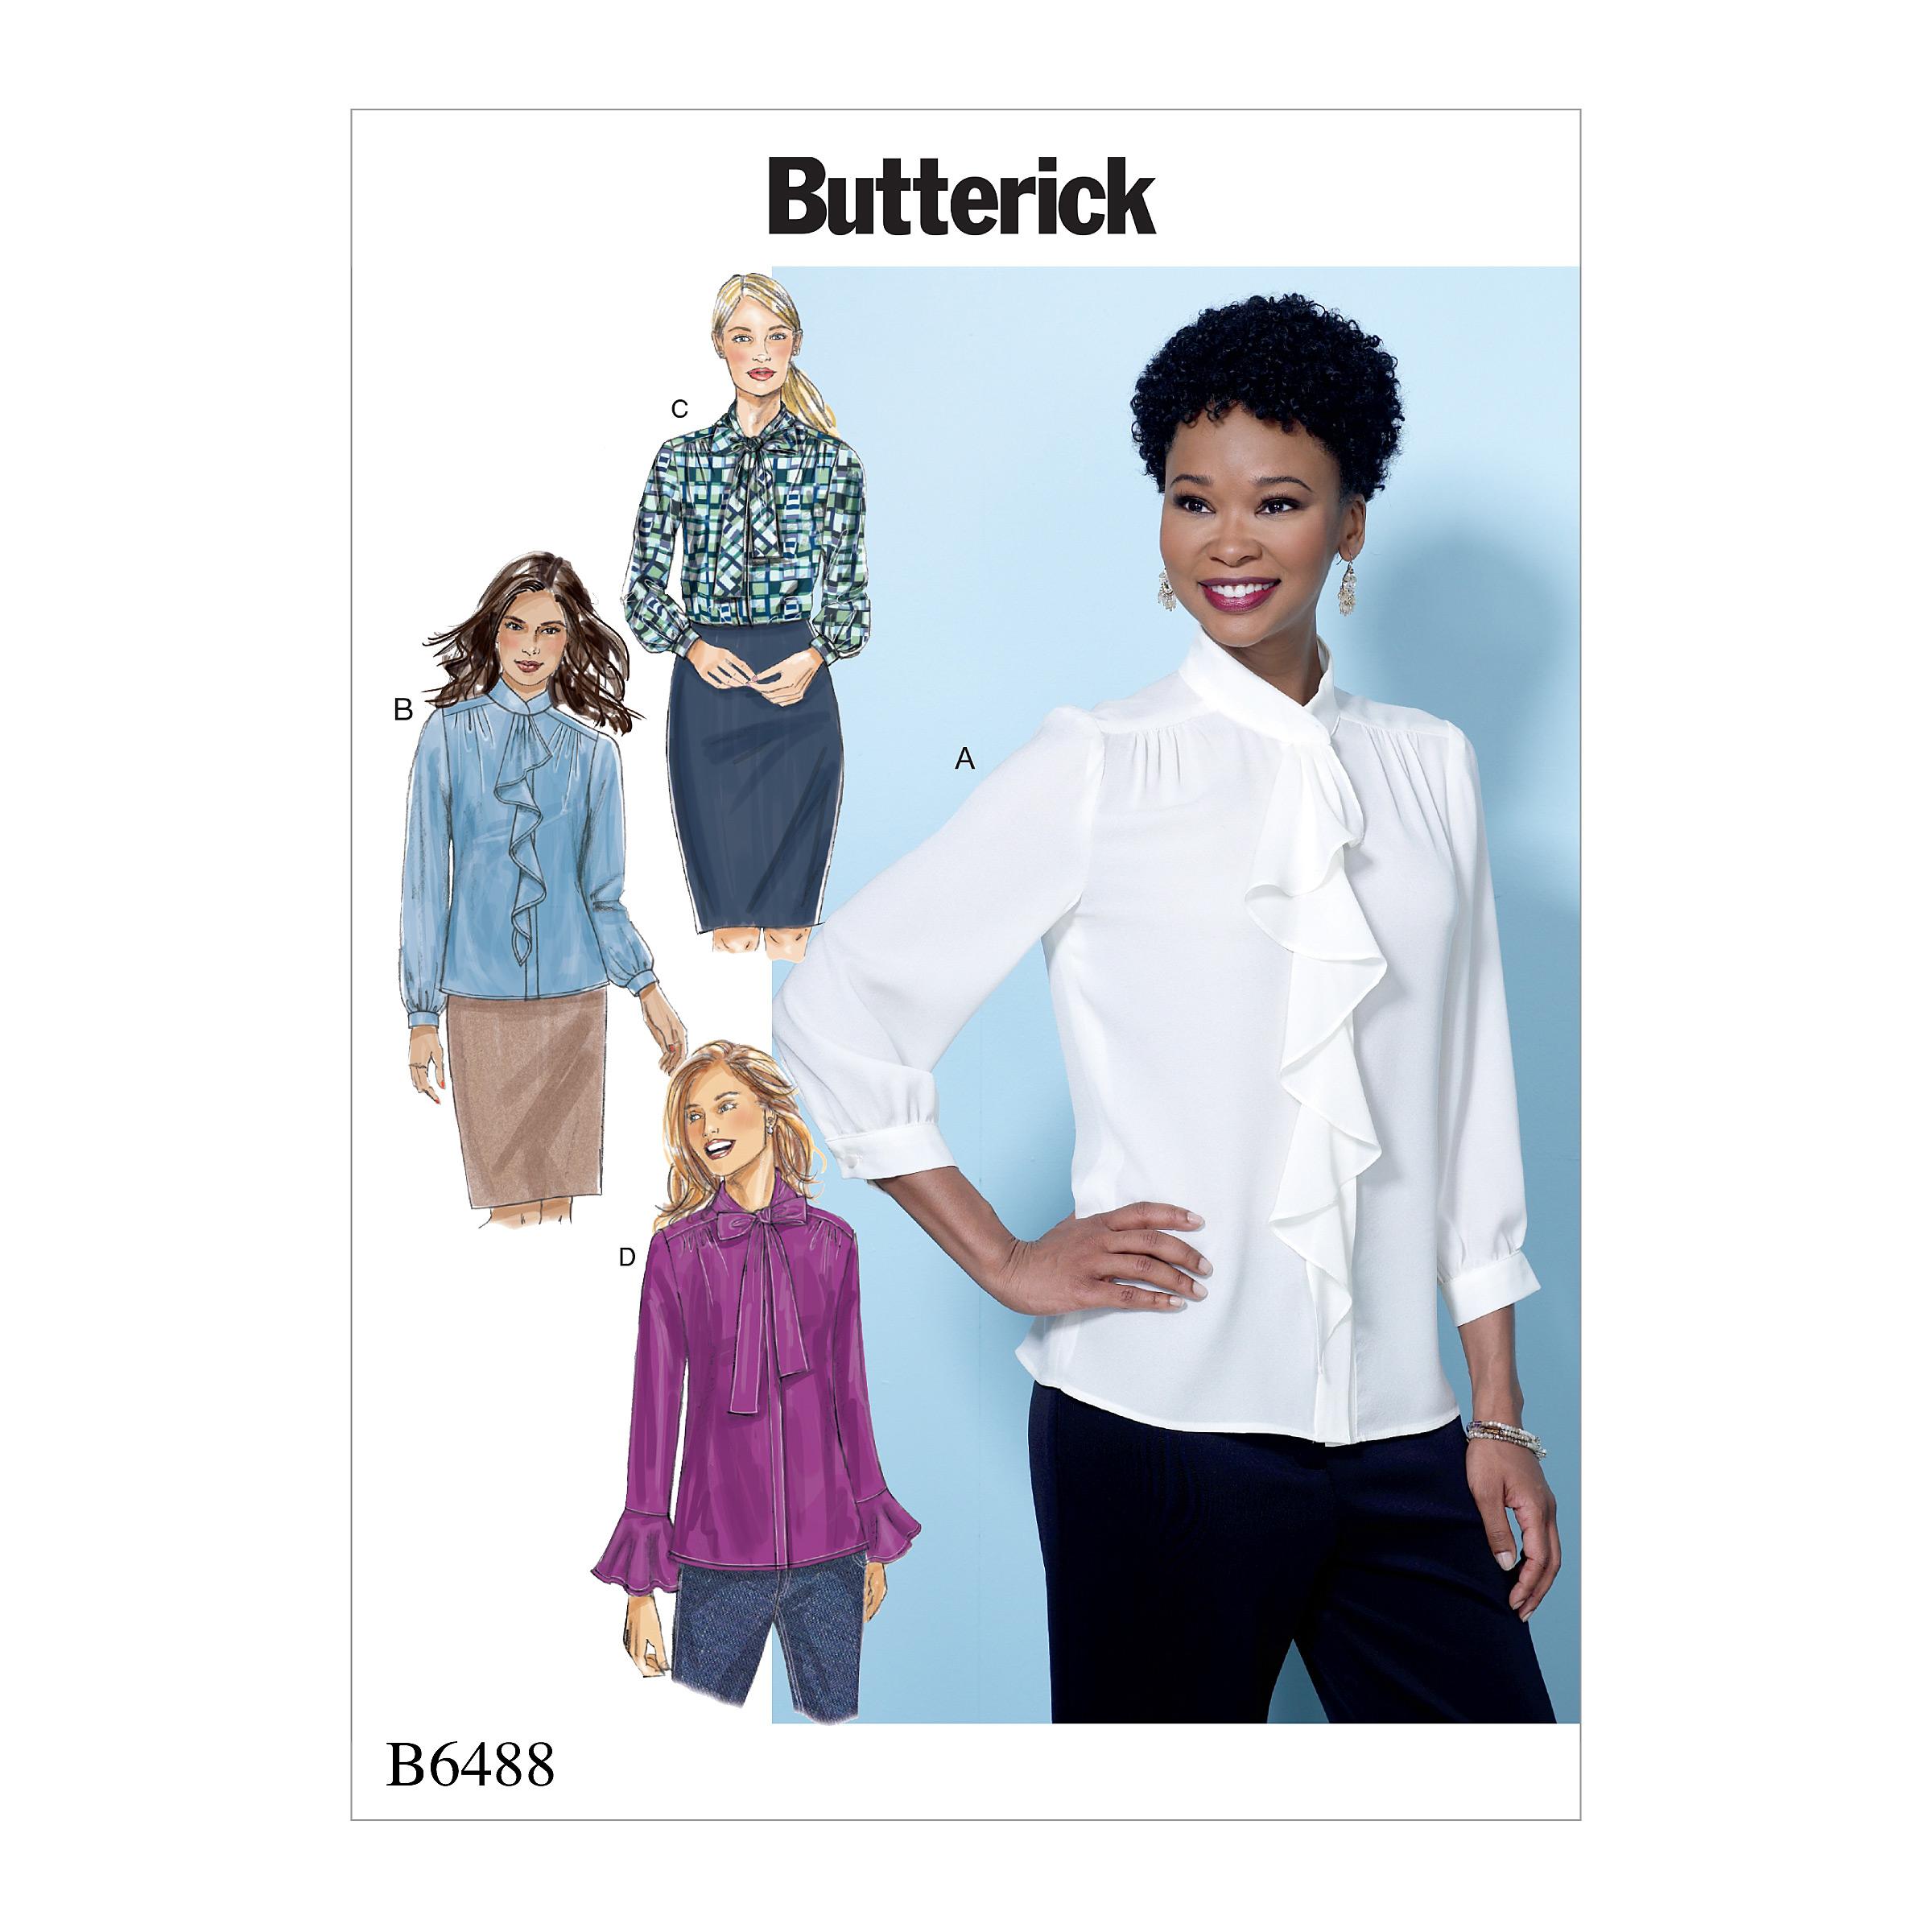 Butterick B6488 Misses' Tops with Neckline and Sleeve Variations